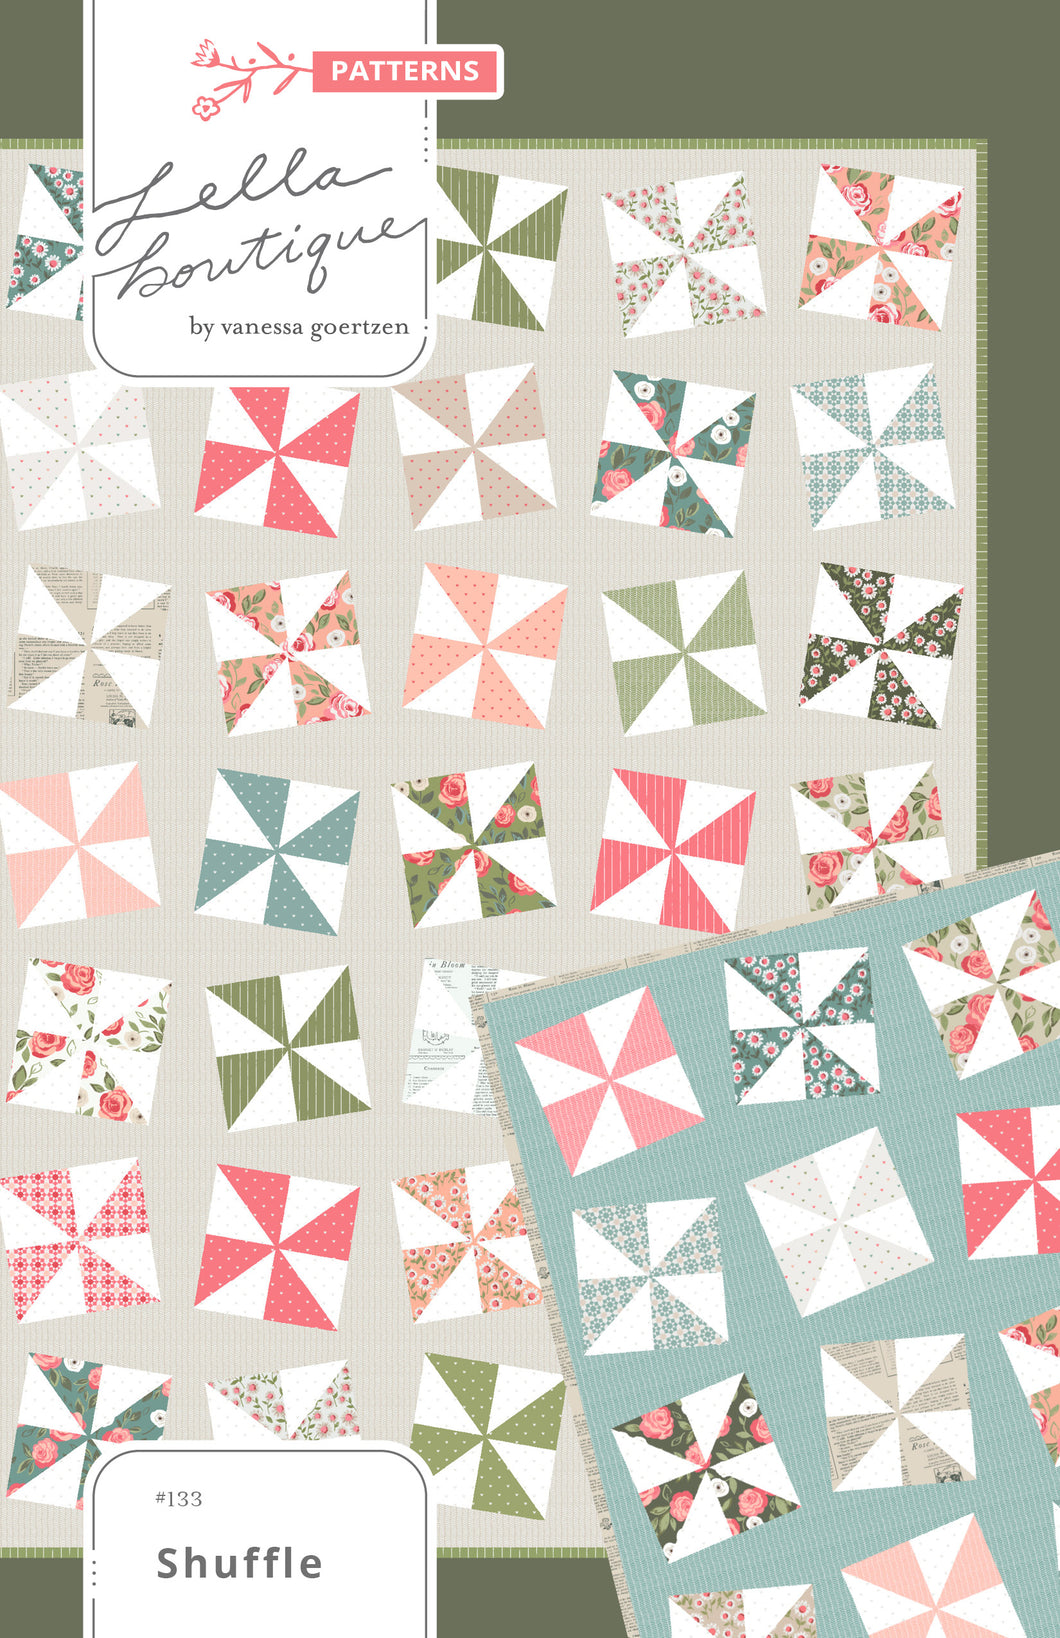 Shuffle pinwheel quilt pattern by Lella Boutique. Make it with charm packs. Fabric is Love Note by Lella Boutique for Moda Fabrics.